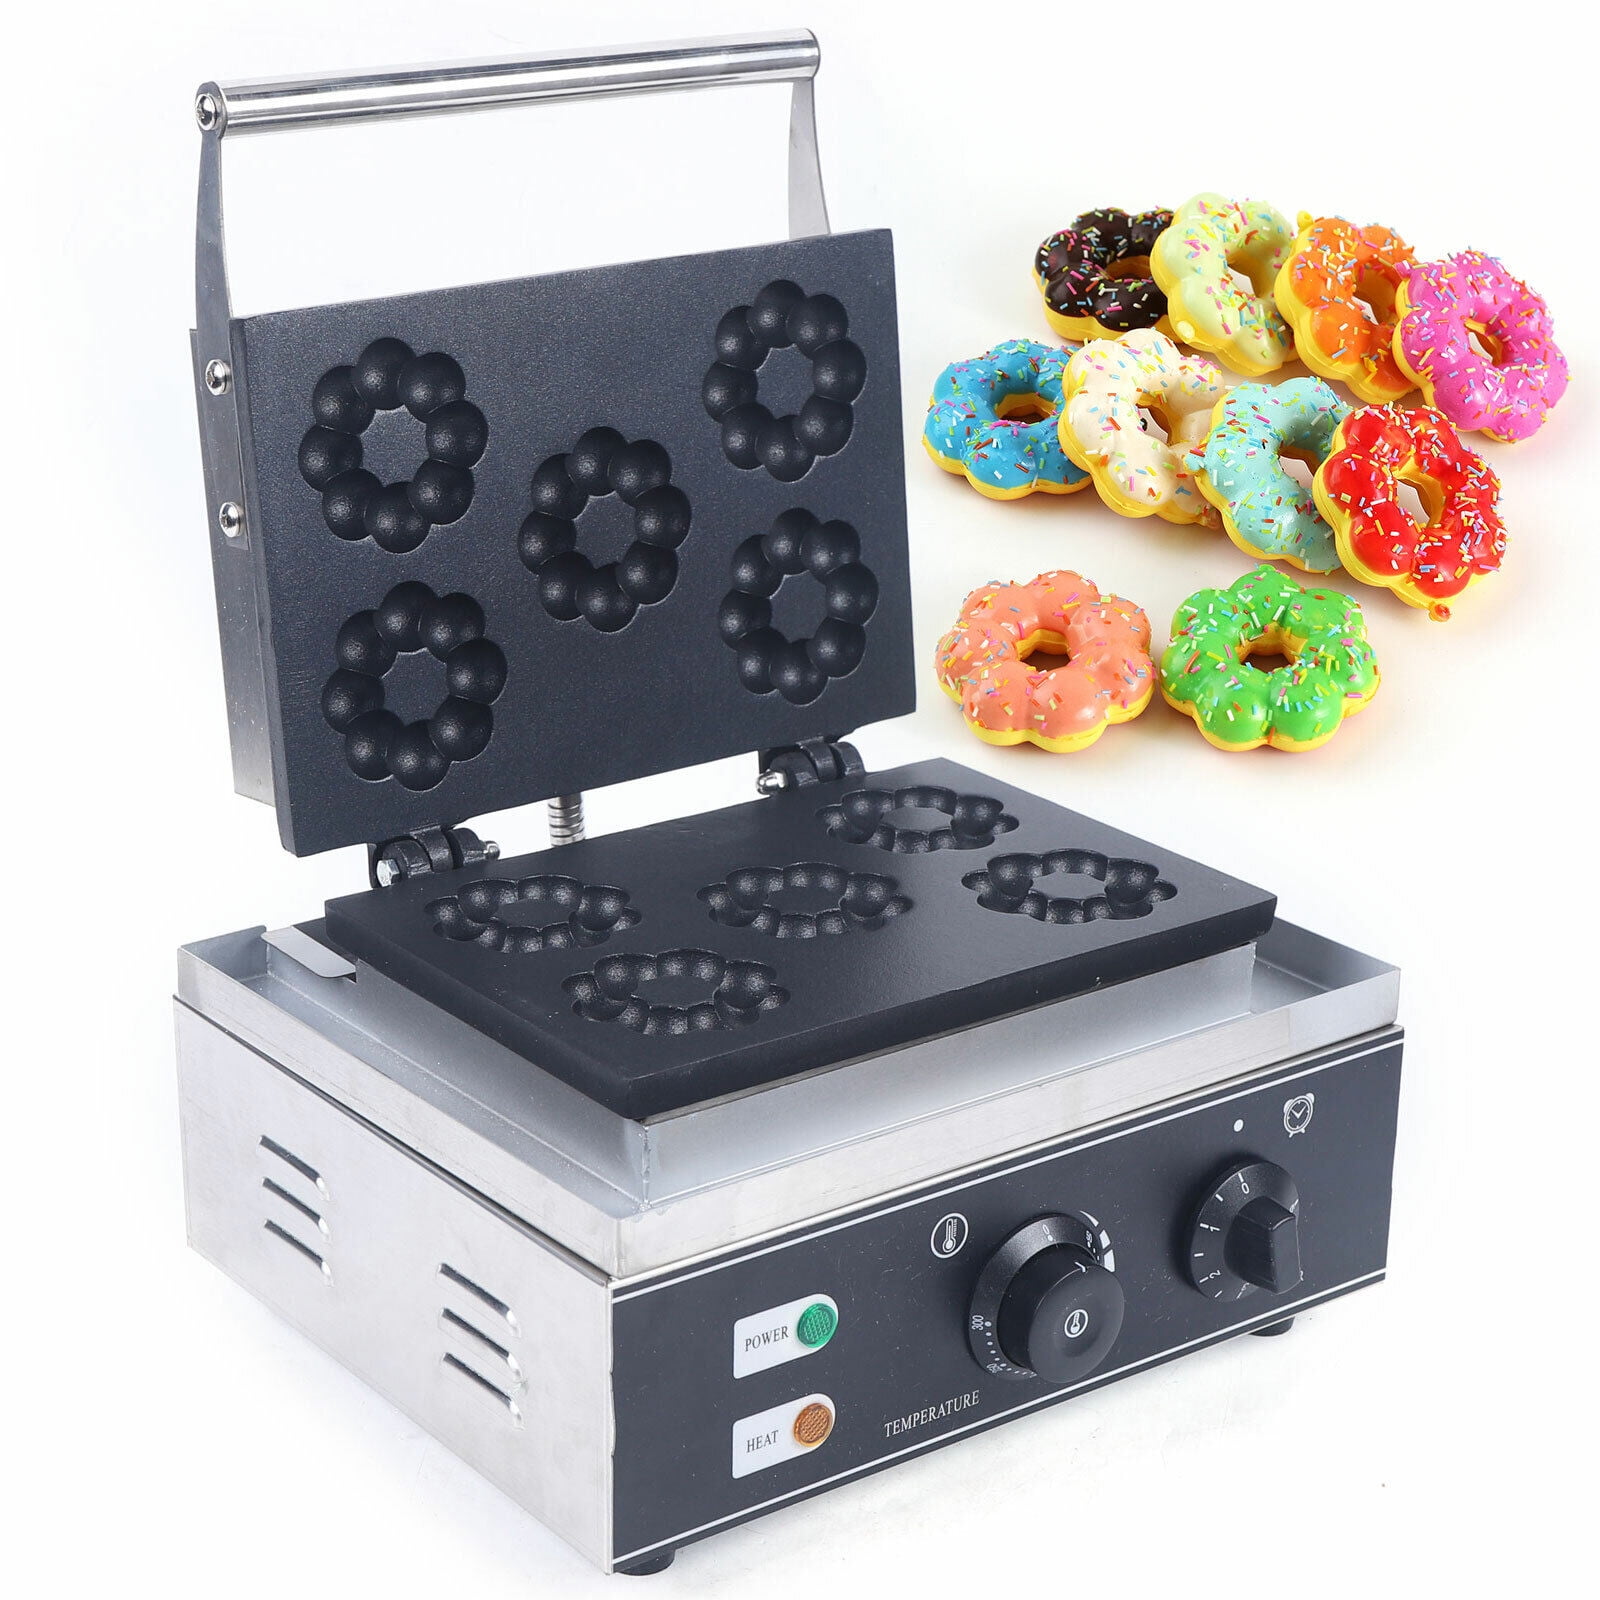 Mkyiongou Commercial Electric Mini Donut Making Machine Nonstick Waffle  Baker Maker 1500W